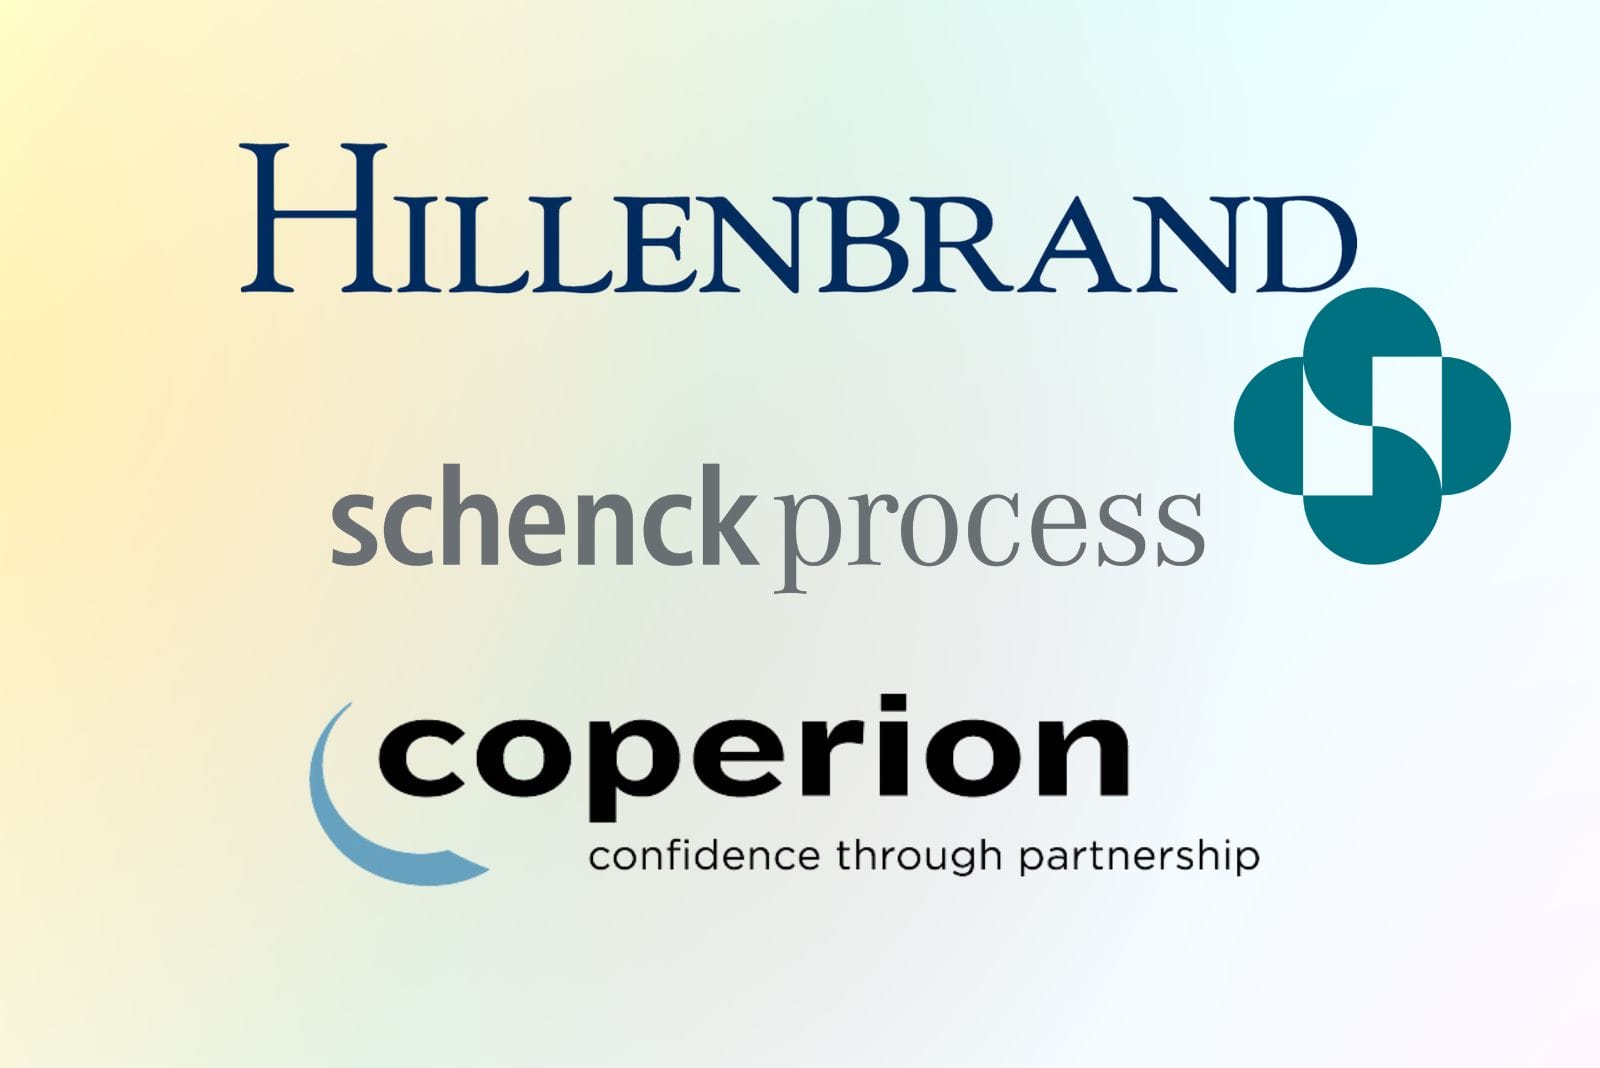 hillenbrand, schenck process and coperion logos with the words